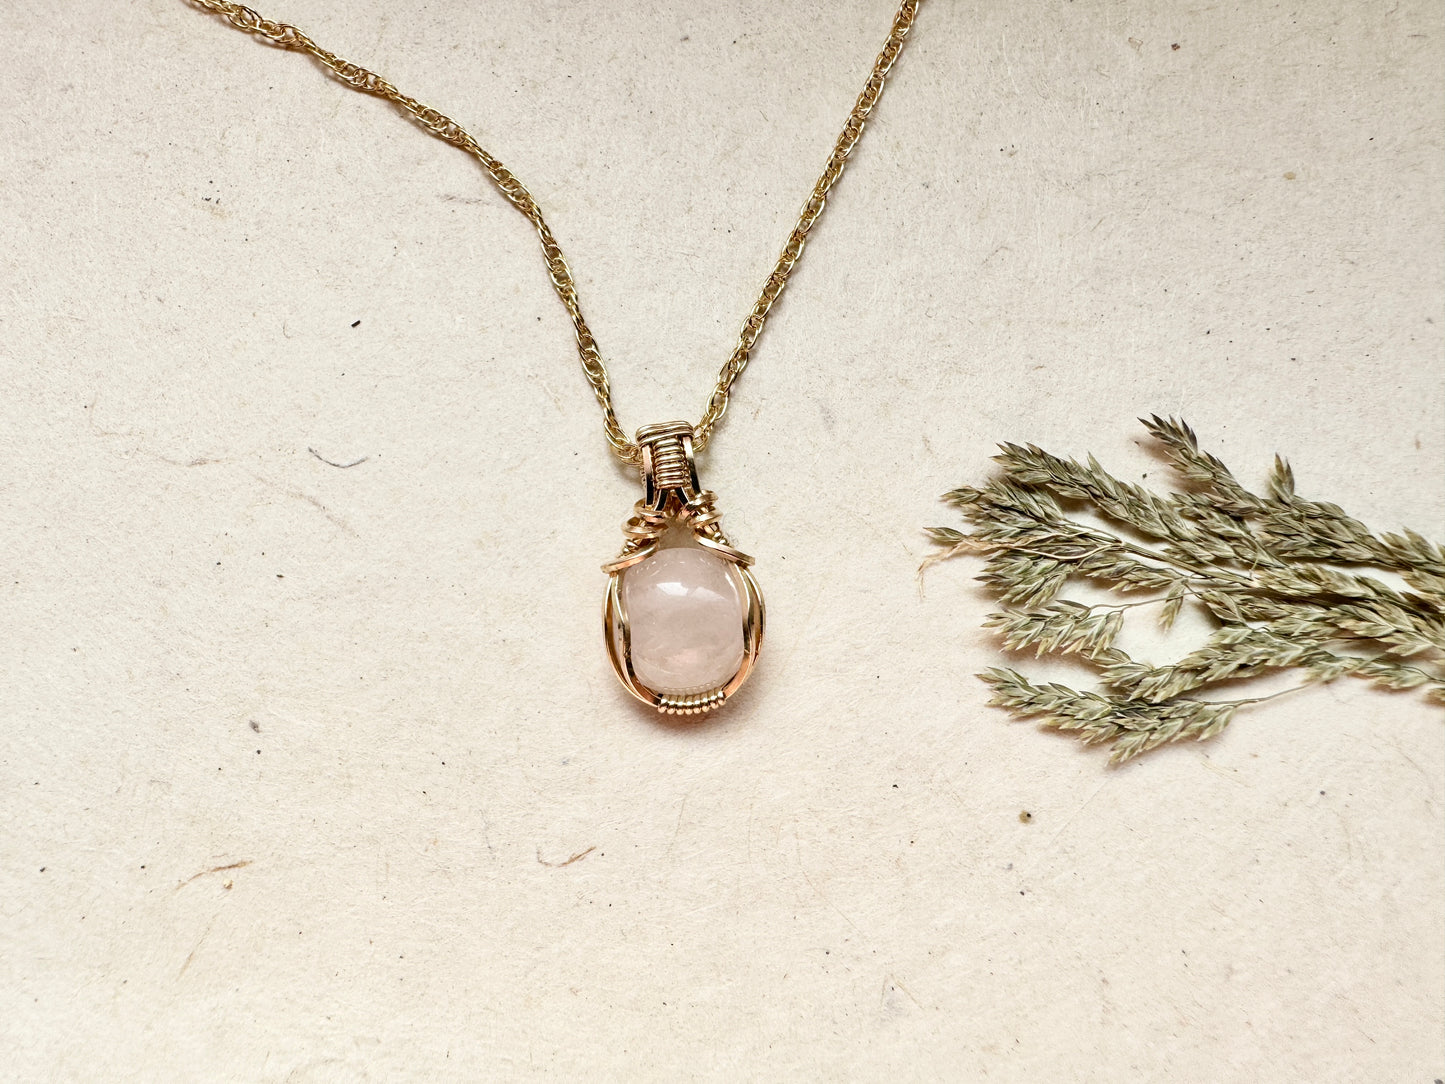 Small Rose Quartz Necklace in 14K Gold Fill